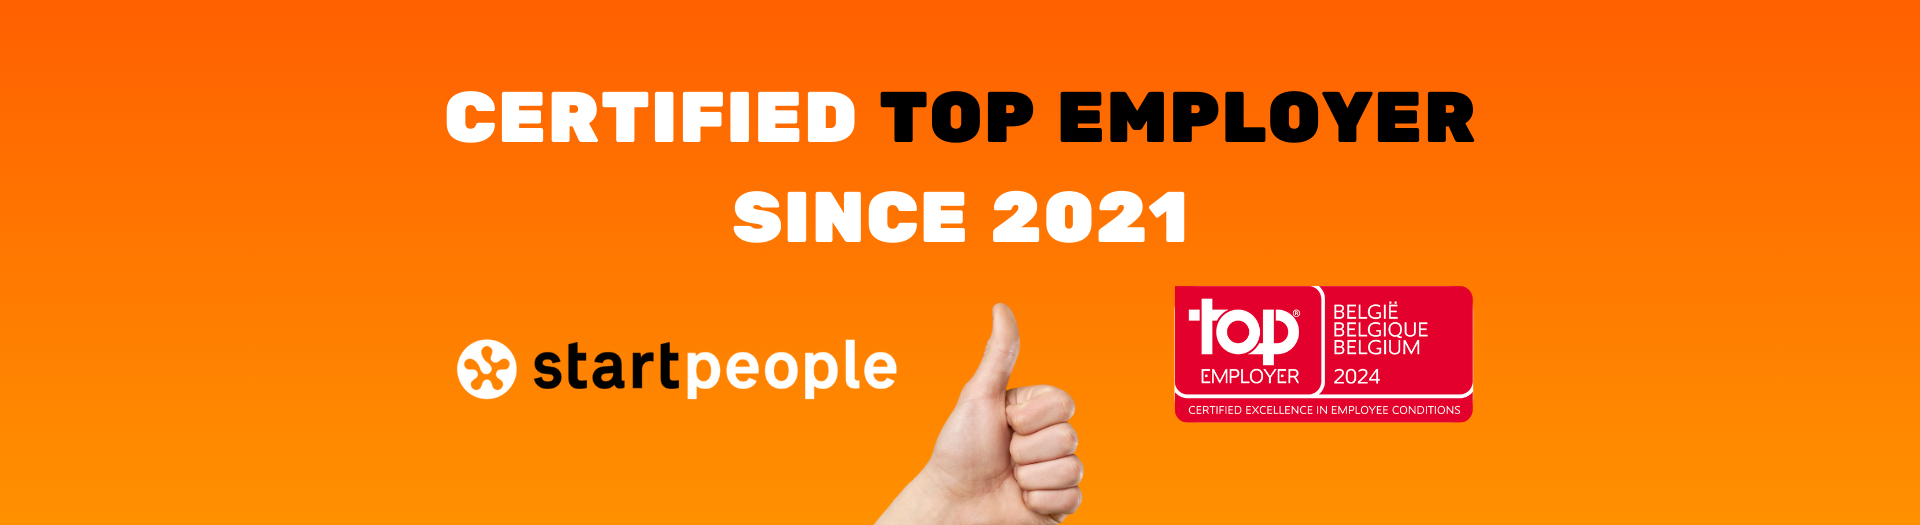 CERTIFIED TOP EMPLOYER SINCE 2021